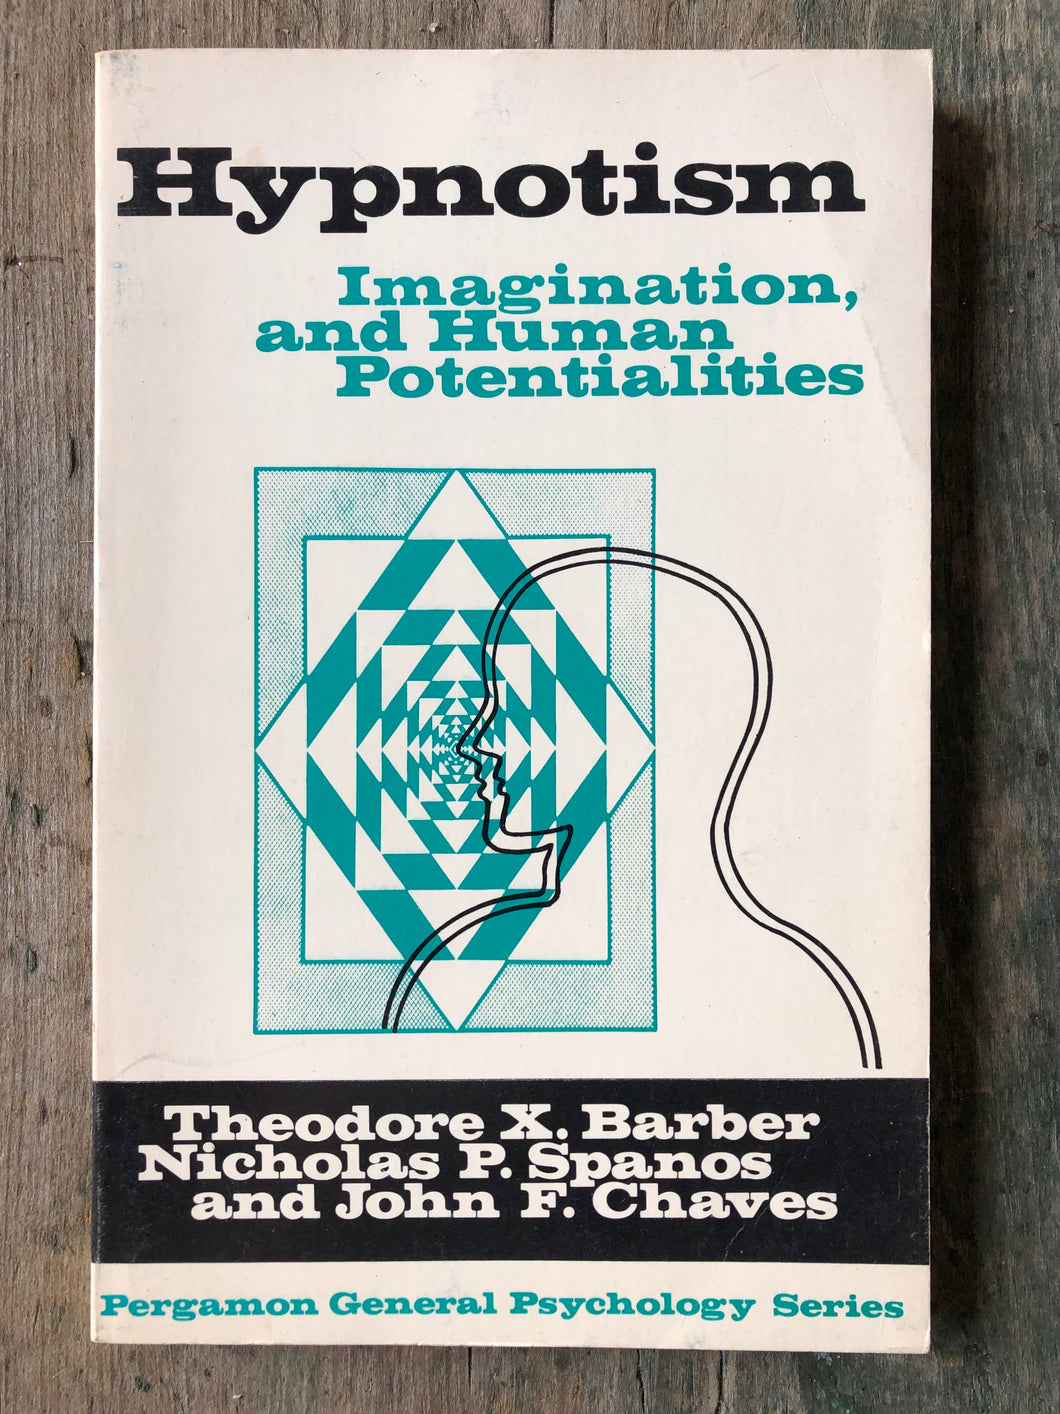 Hypnosis, Imagination, and Human Potentialities by Theodore X. Barber, Nicholas P. Spanos, and John F. Chaves